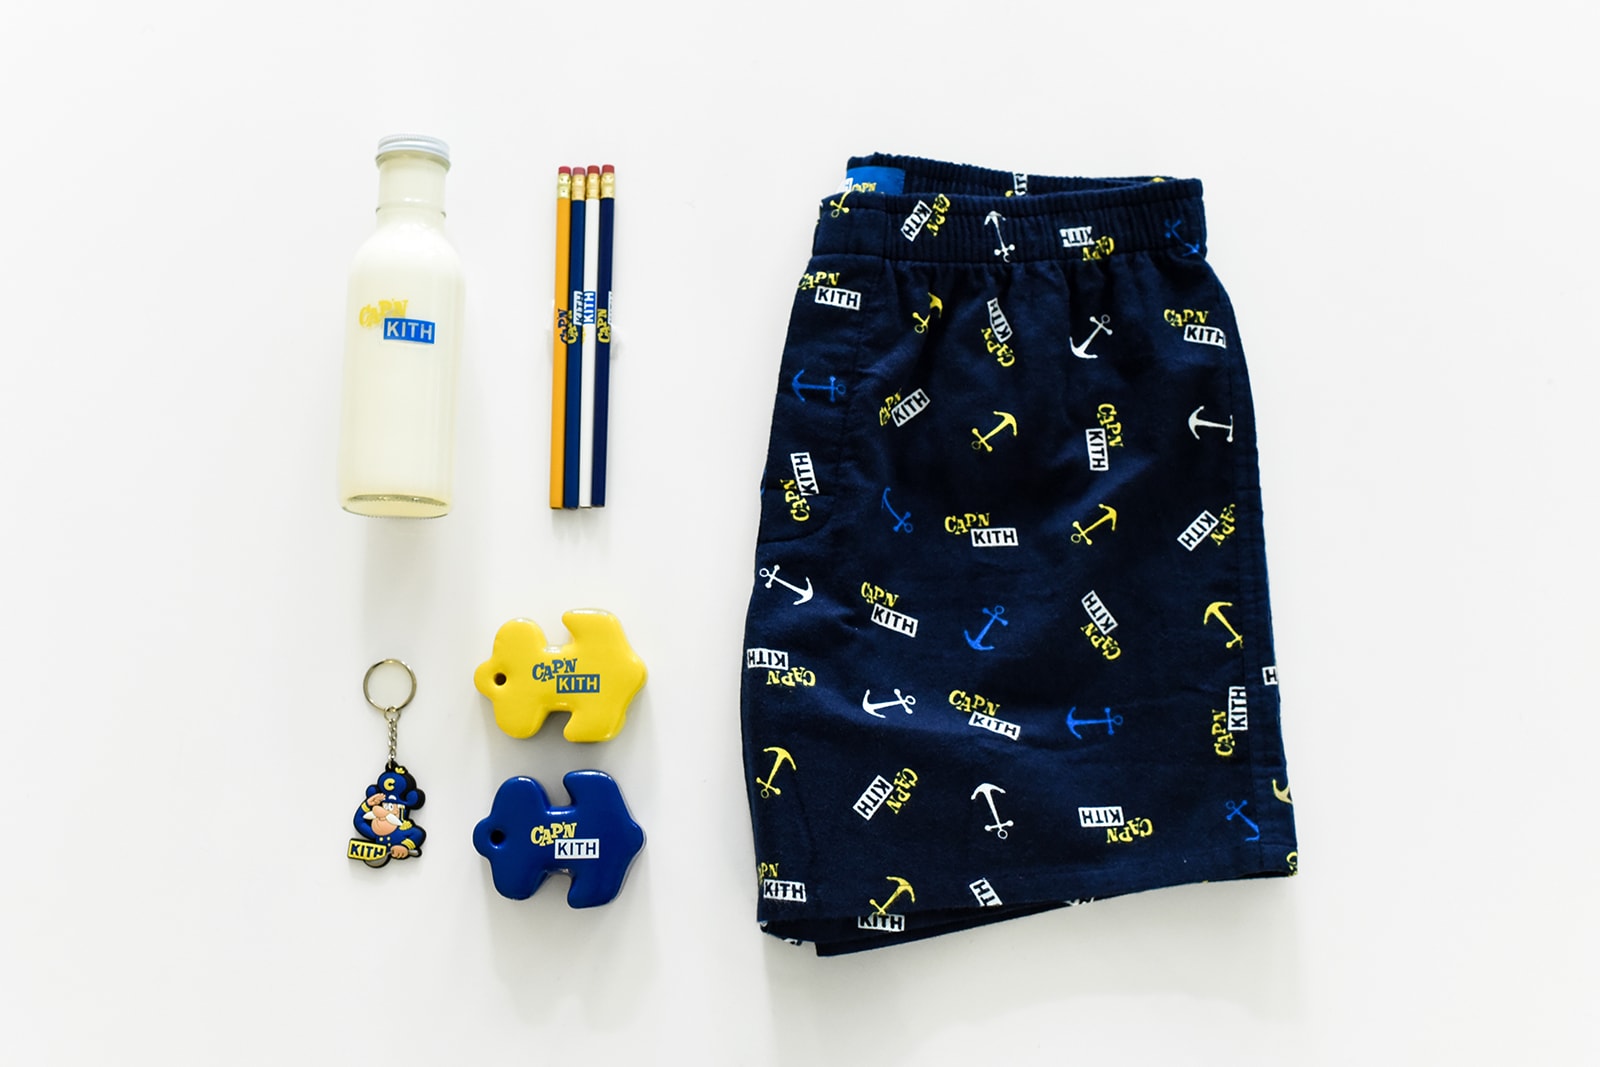 KITH x Cap'n Crunch Collection